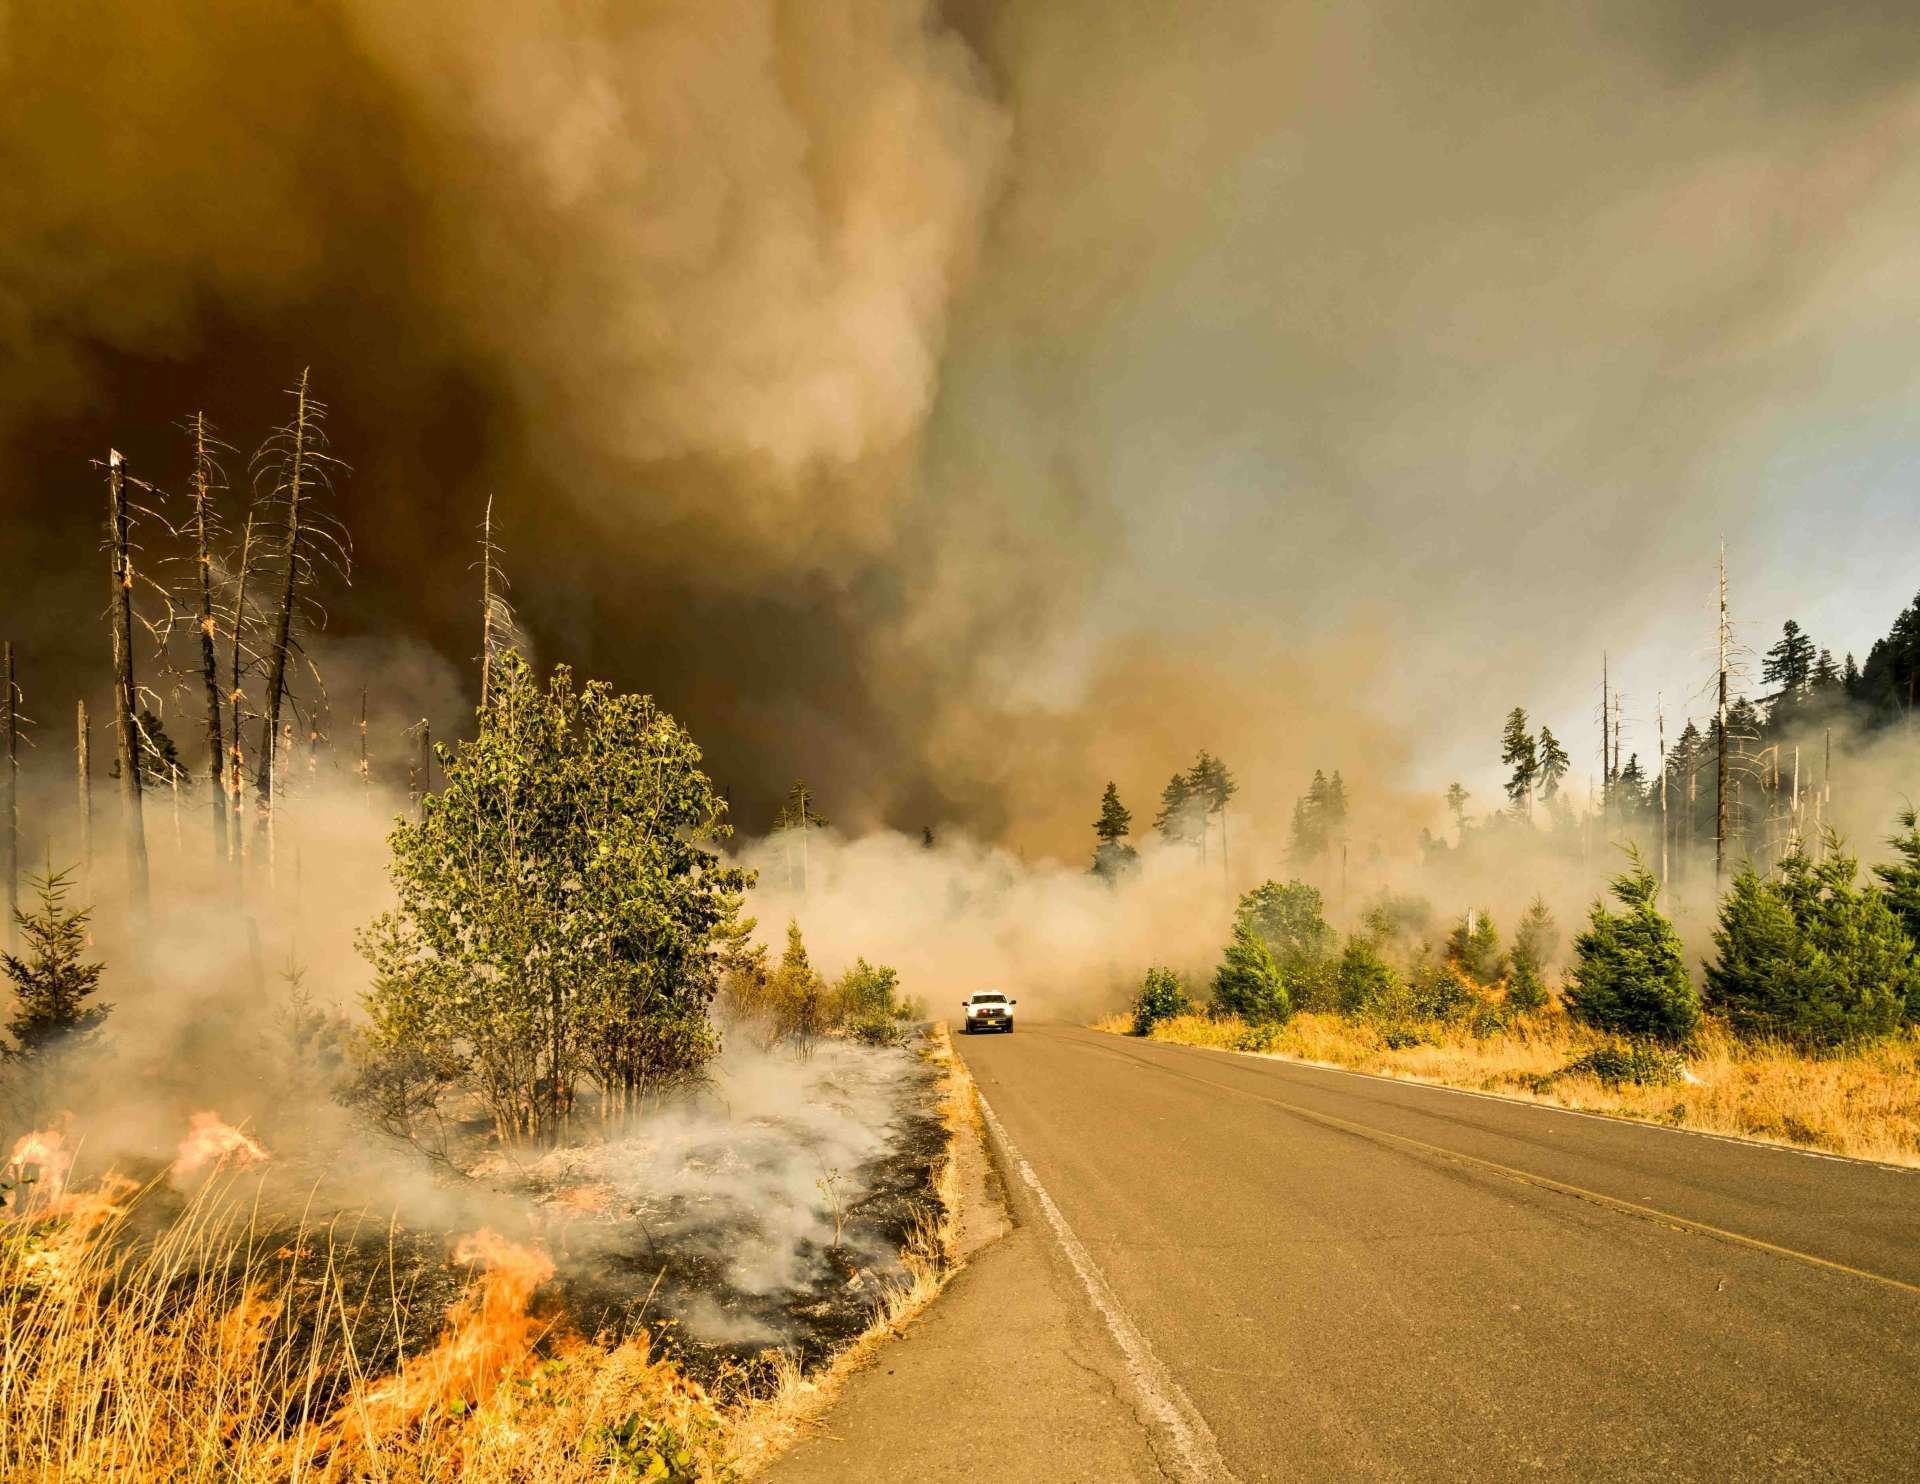 Truck fleeing a forest fire - photo by Marcus Kauffman